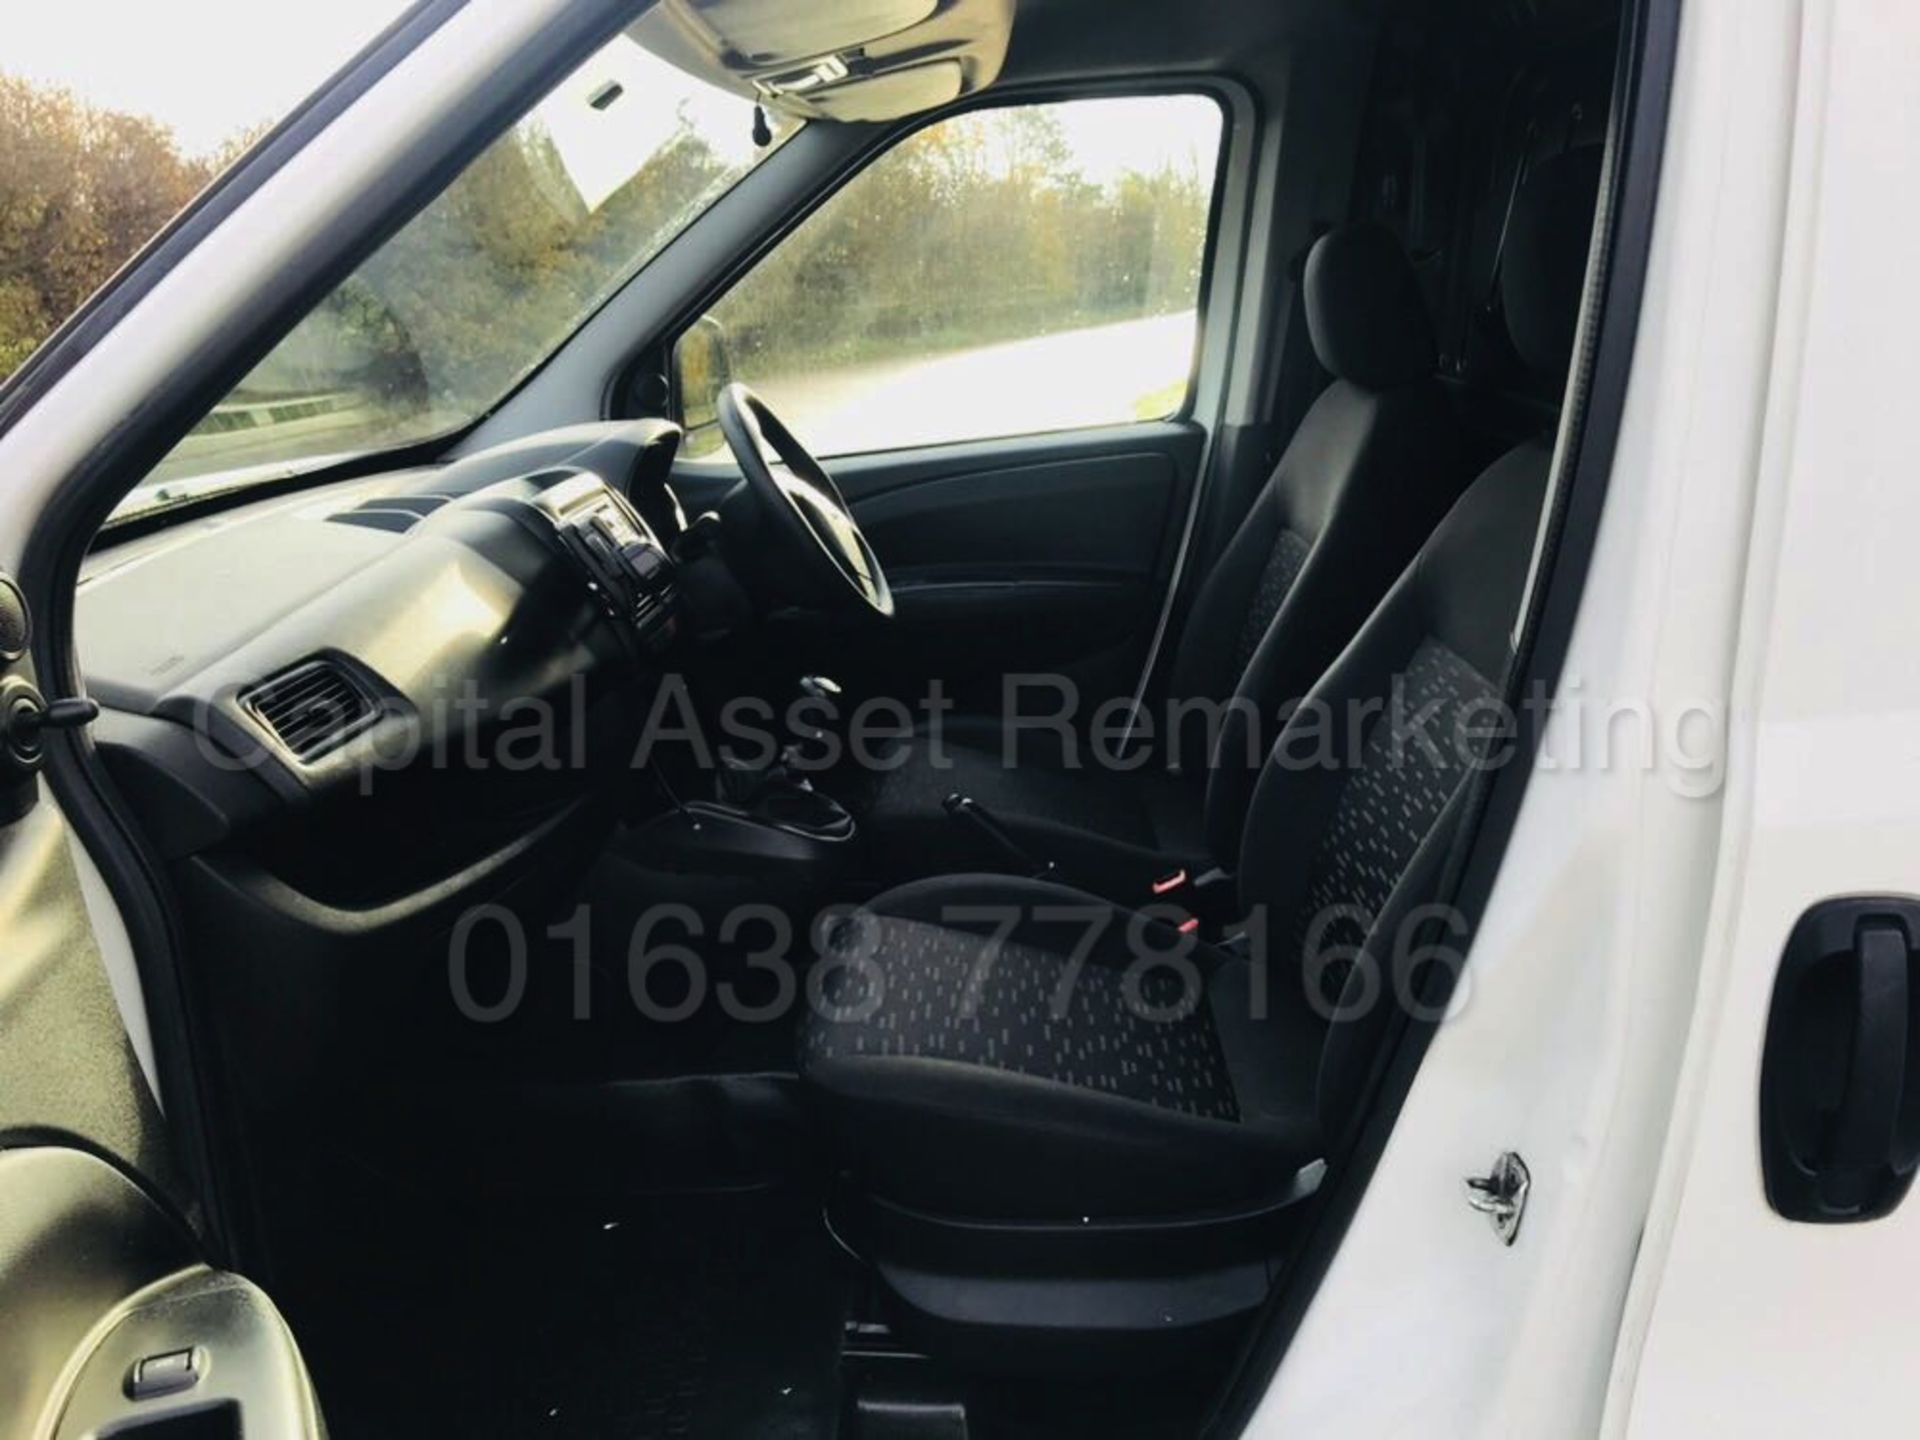 VAUXHALL COMBO 2000 L1H1 (2012 - NEW MODEL) '1.6 CDTI - 105 BHP - STOP / START' (1 OWNER FROM NEW) - Image 10 of 15